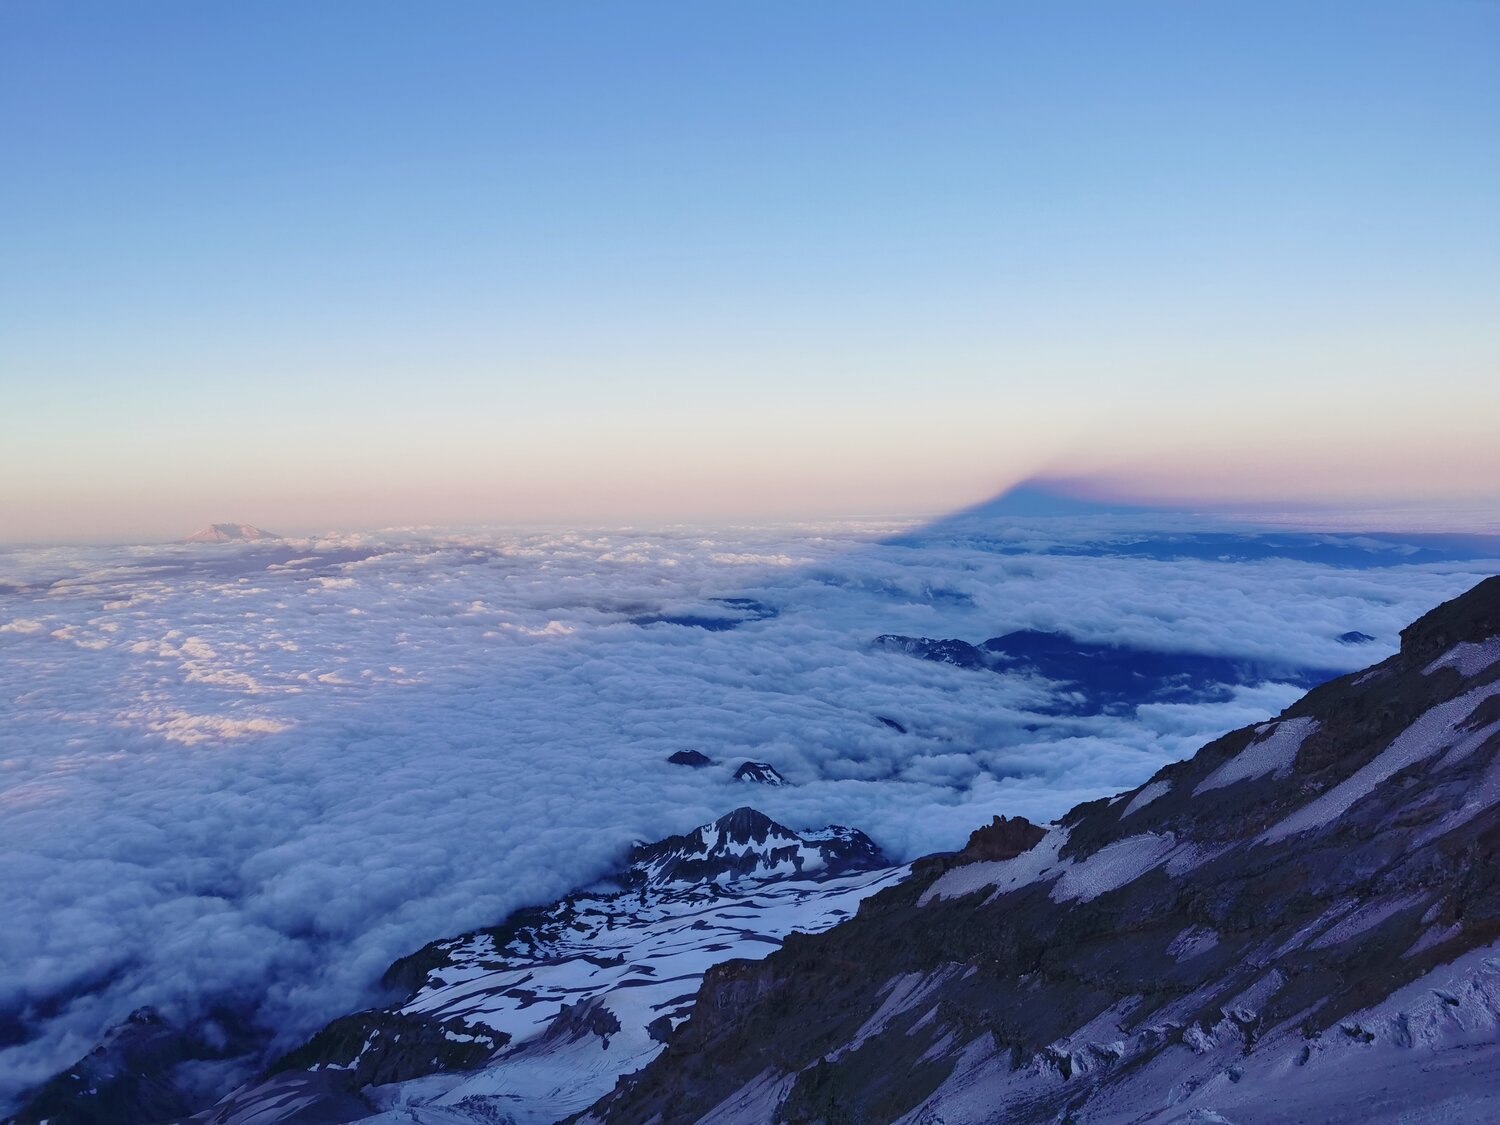 Rainier’s shadow at dawn with St. Helens off to the left